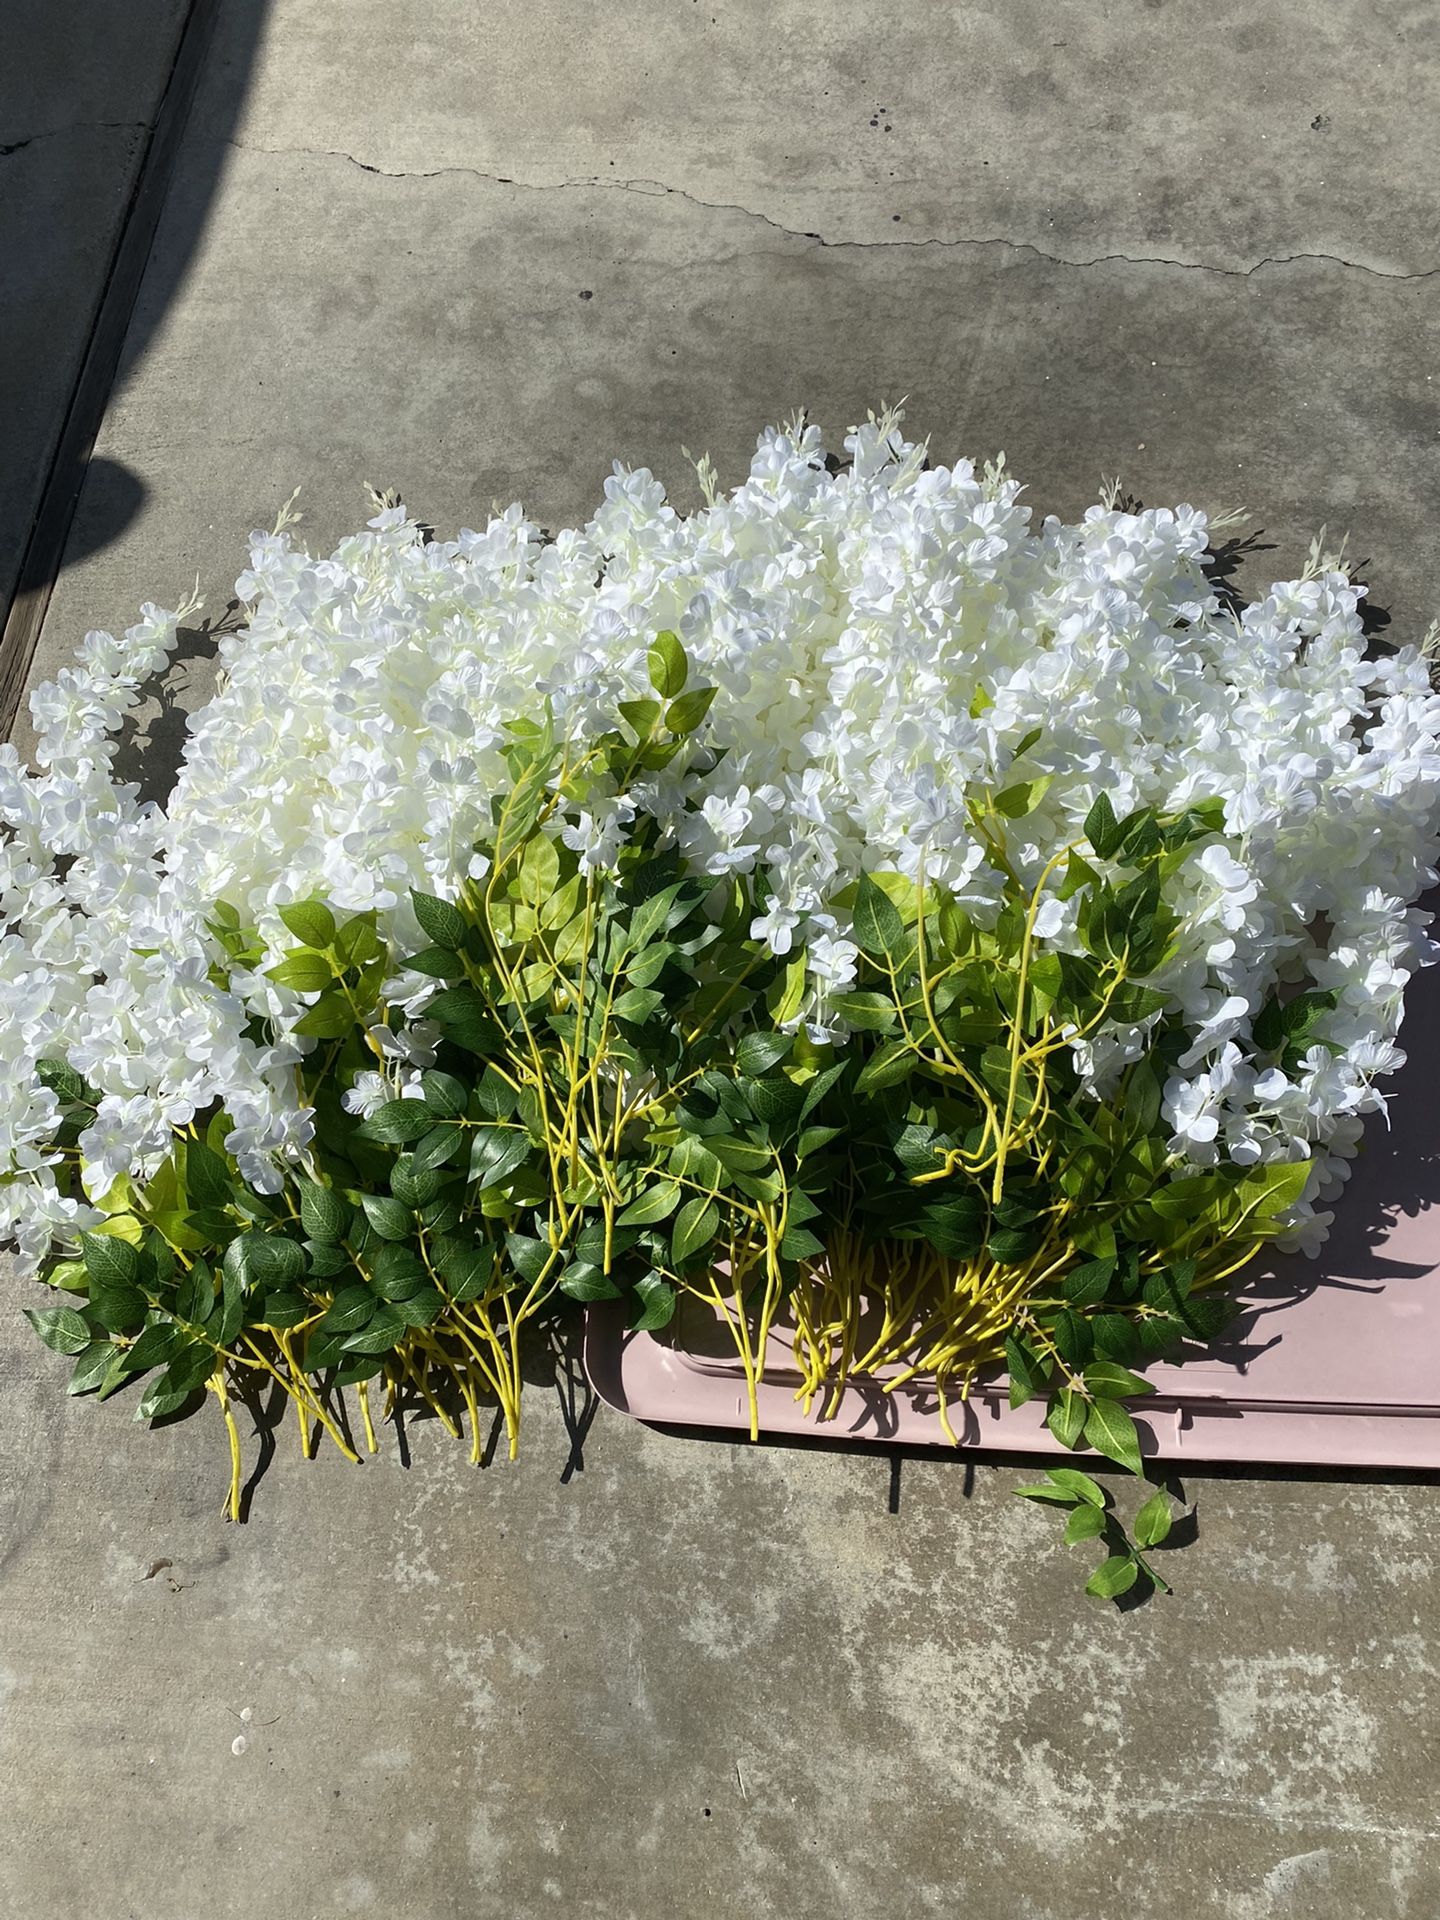 35 Full White Hanging Flowers 3.6ft Artificial Wisteria  $40